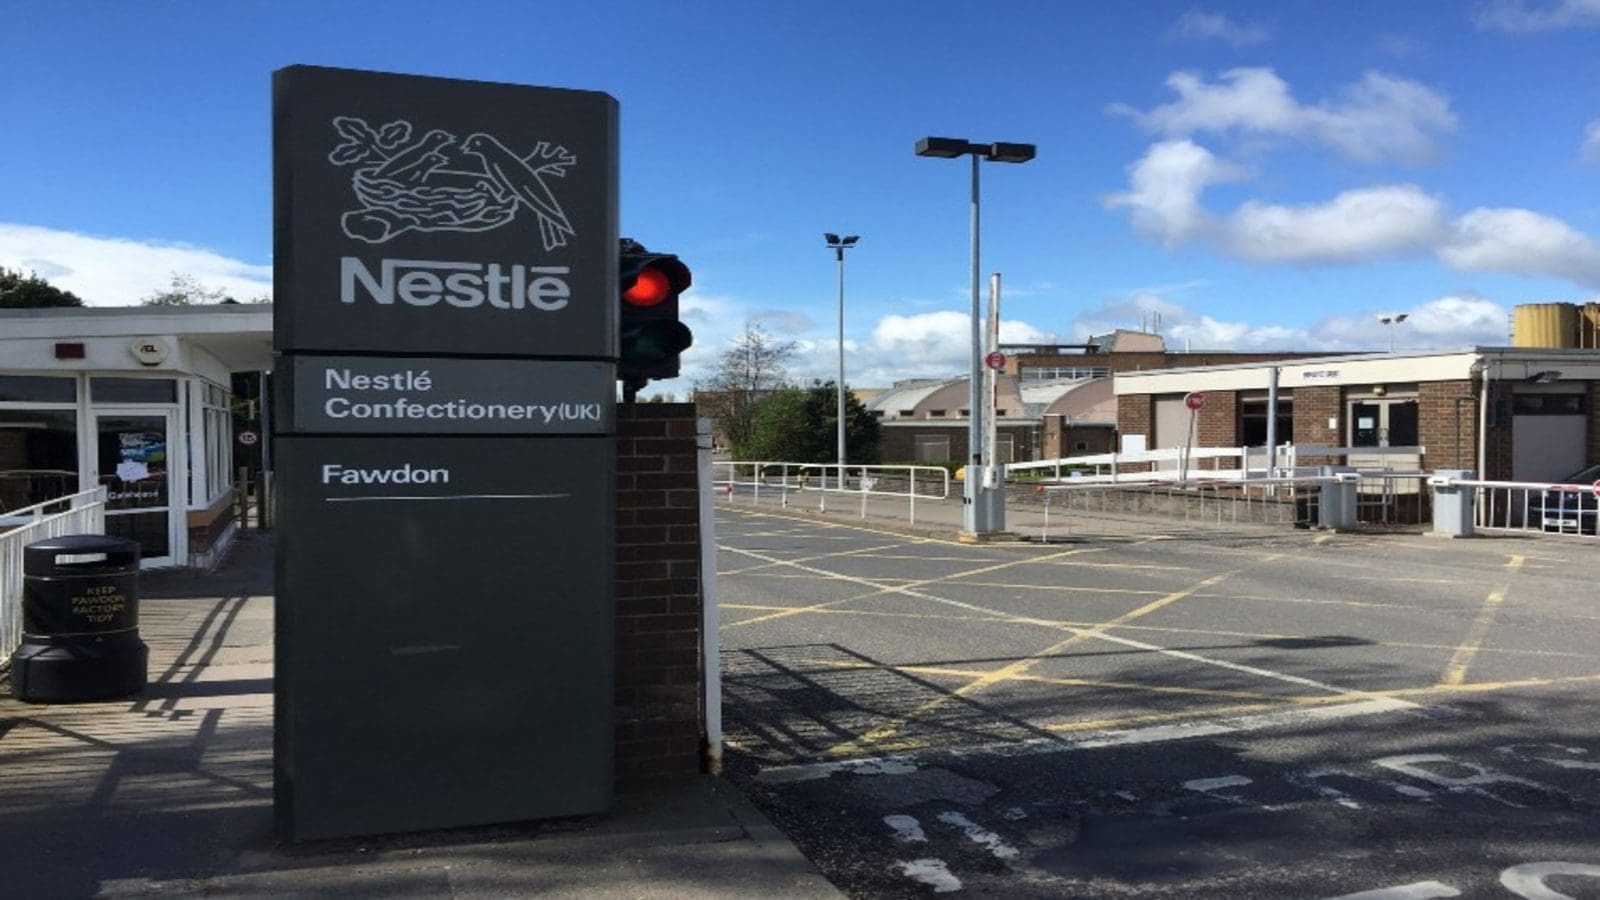 Nestlé to shutter operations at UK confectionery factory as part of portfolio optimization 